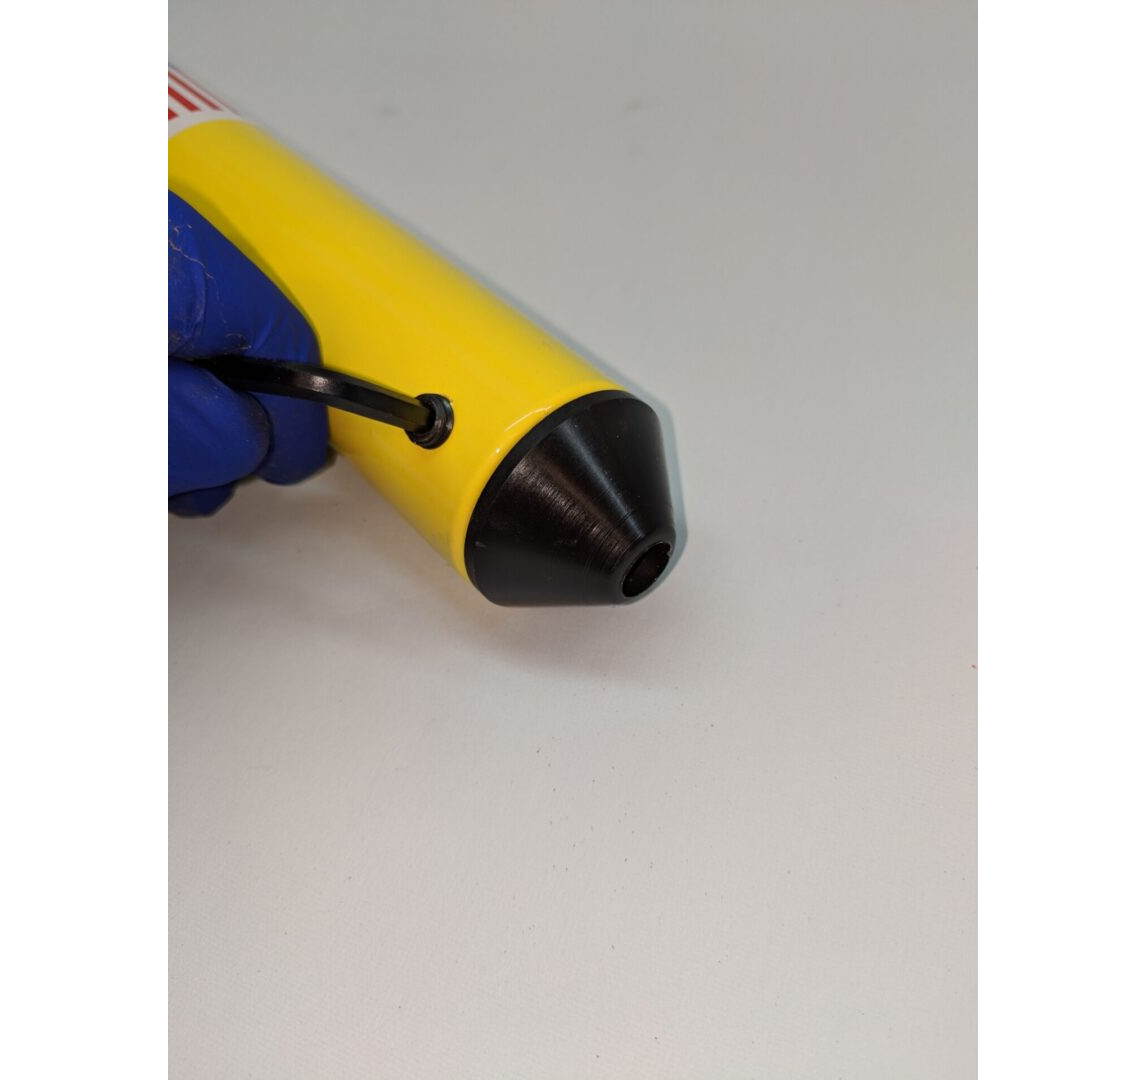 A yellow and black object is being held by a blue tool.